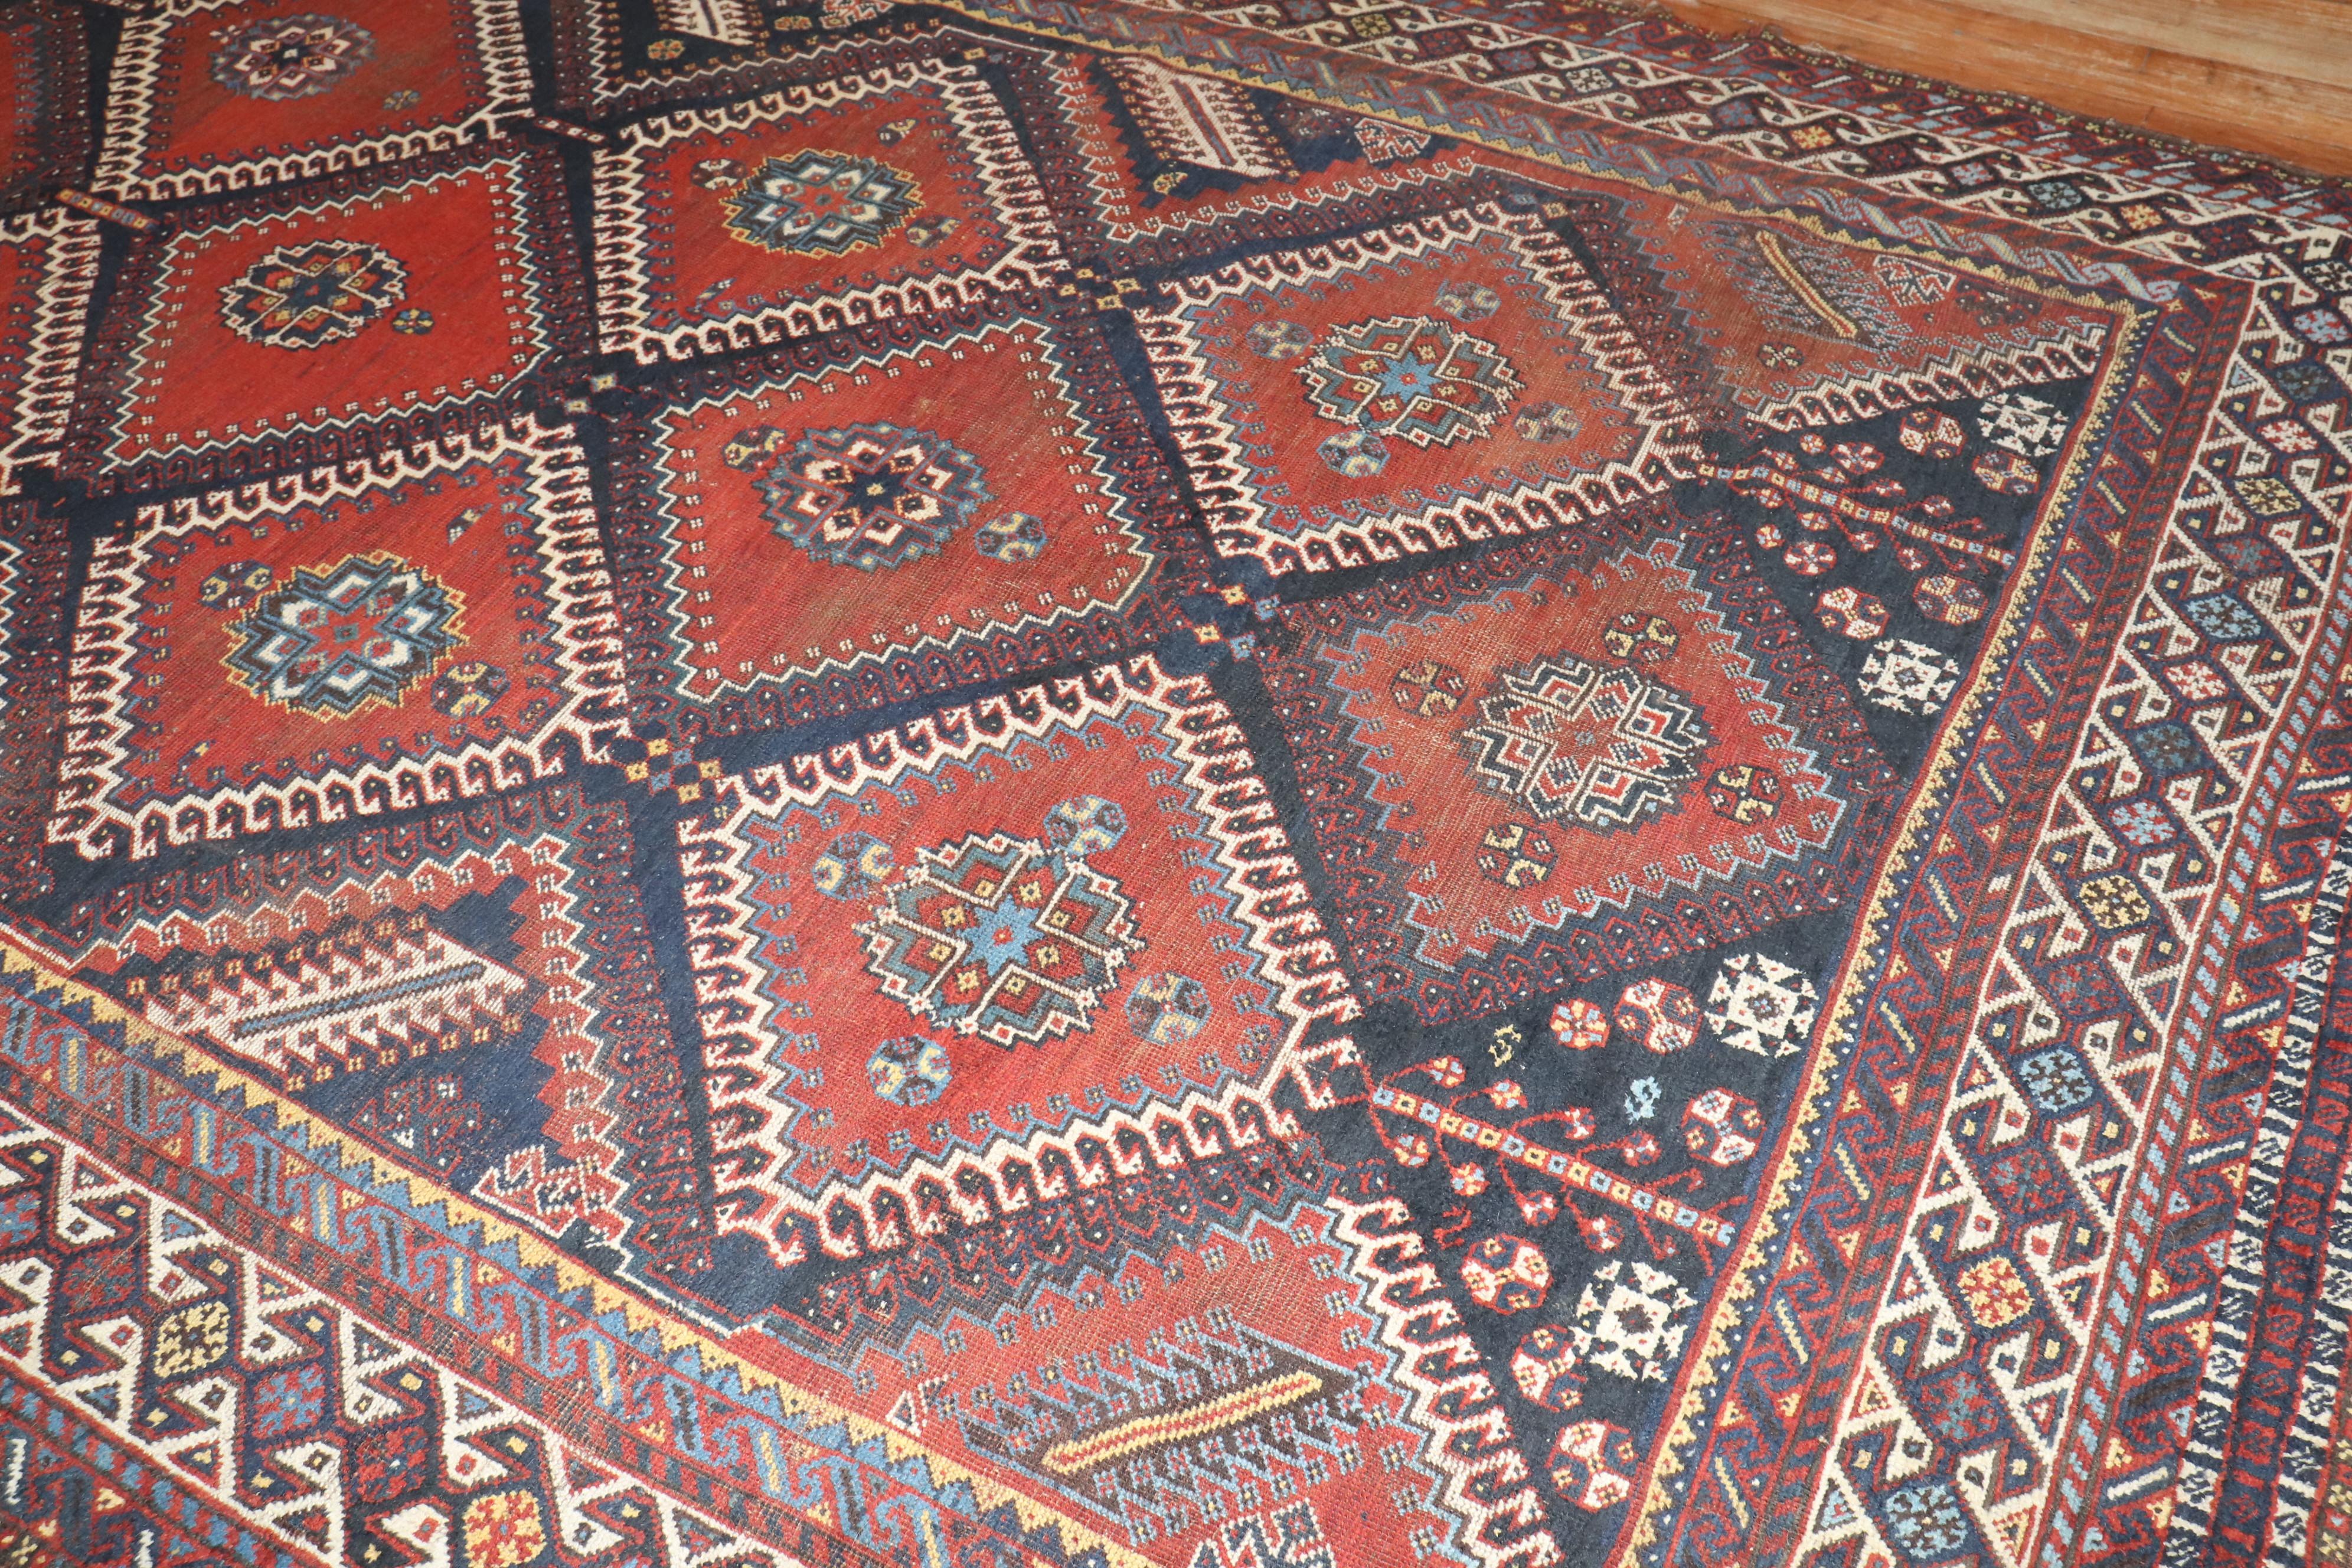 early 20th Century Tribal Shiraz Gallery size Rug

Measures: 6'9'' x 11'4''